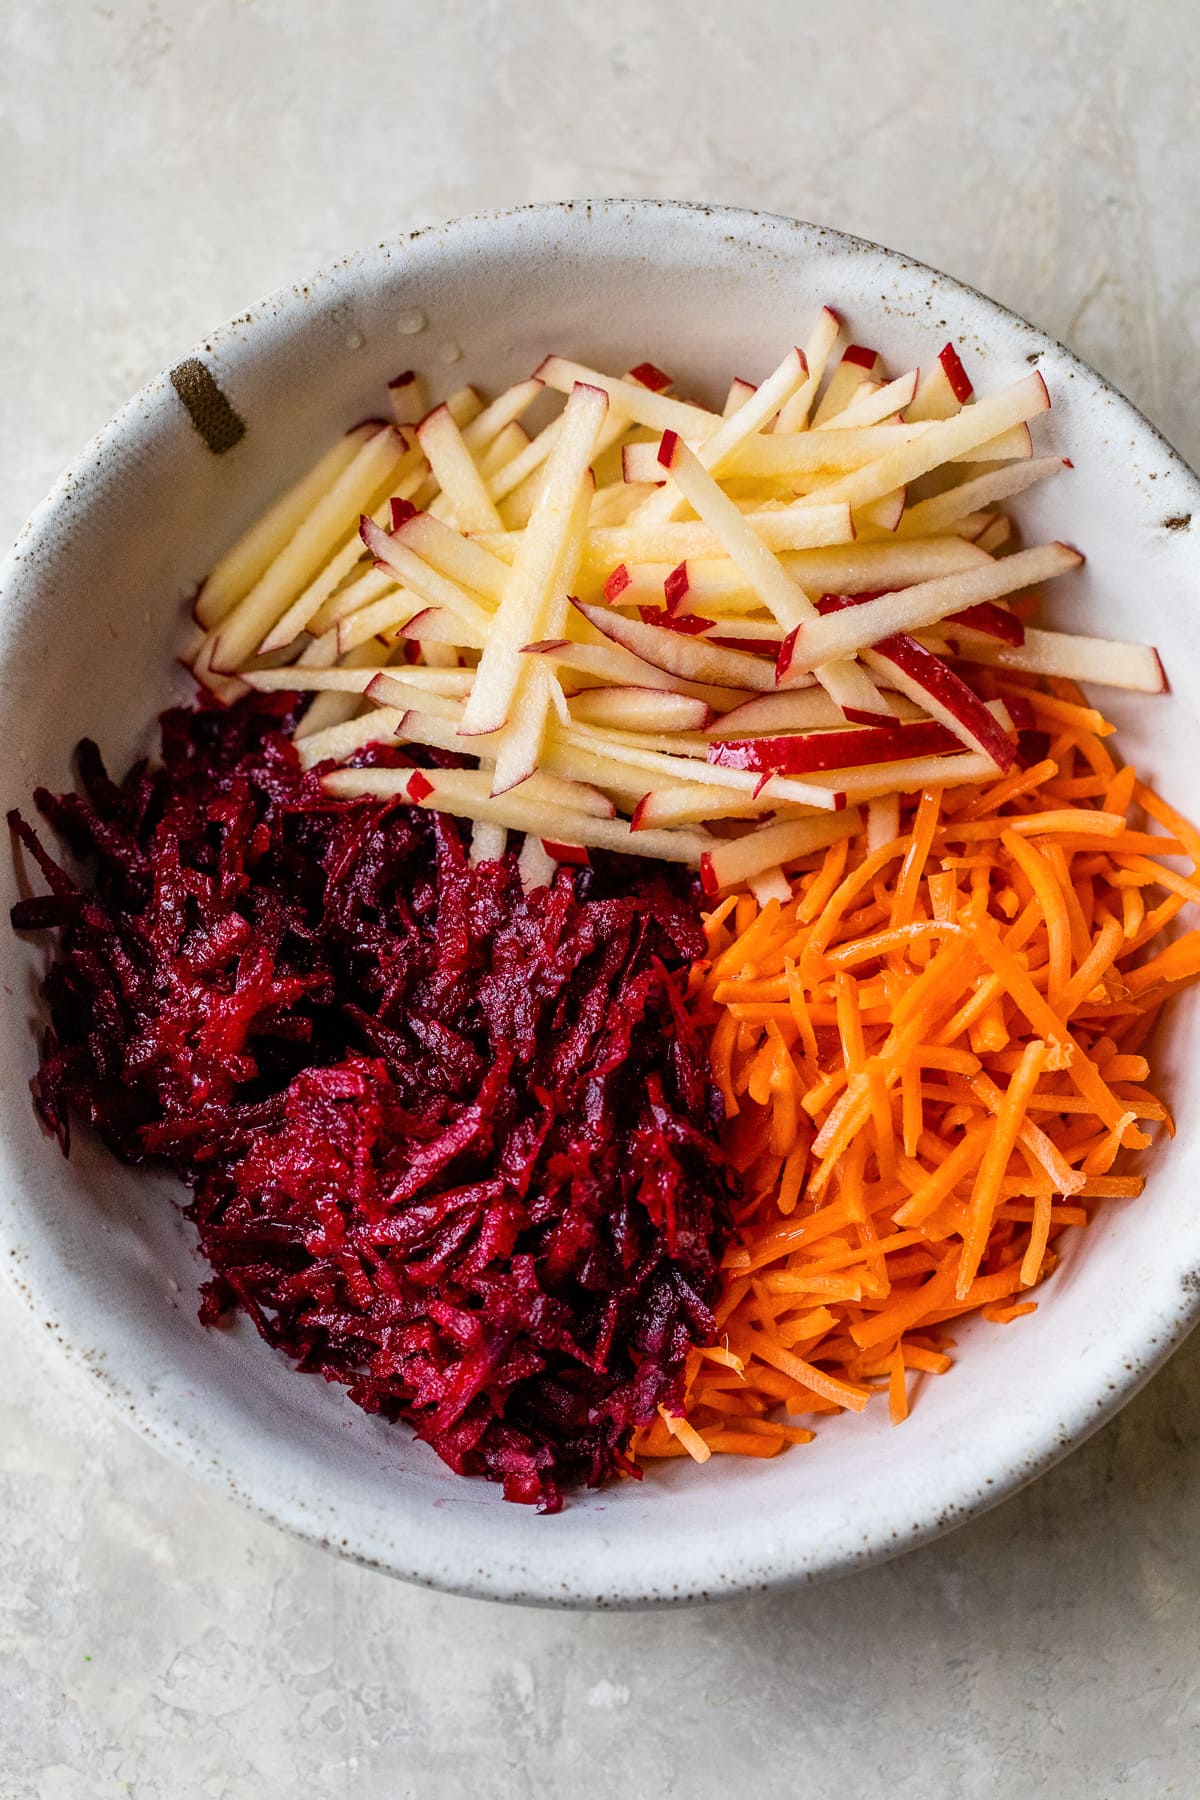 Raw Beetroot Salad with Carrots and Apples